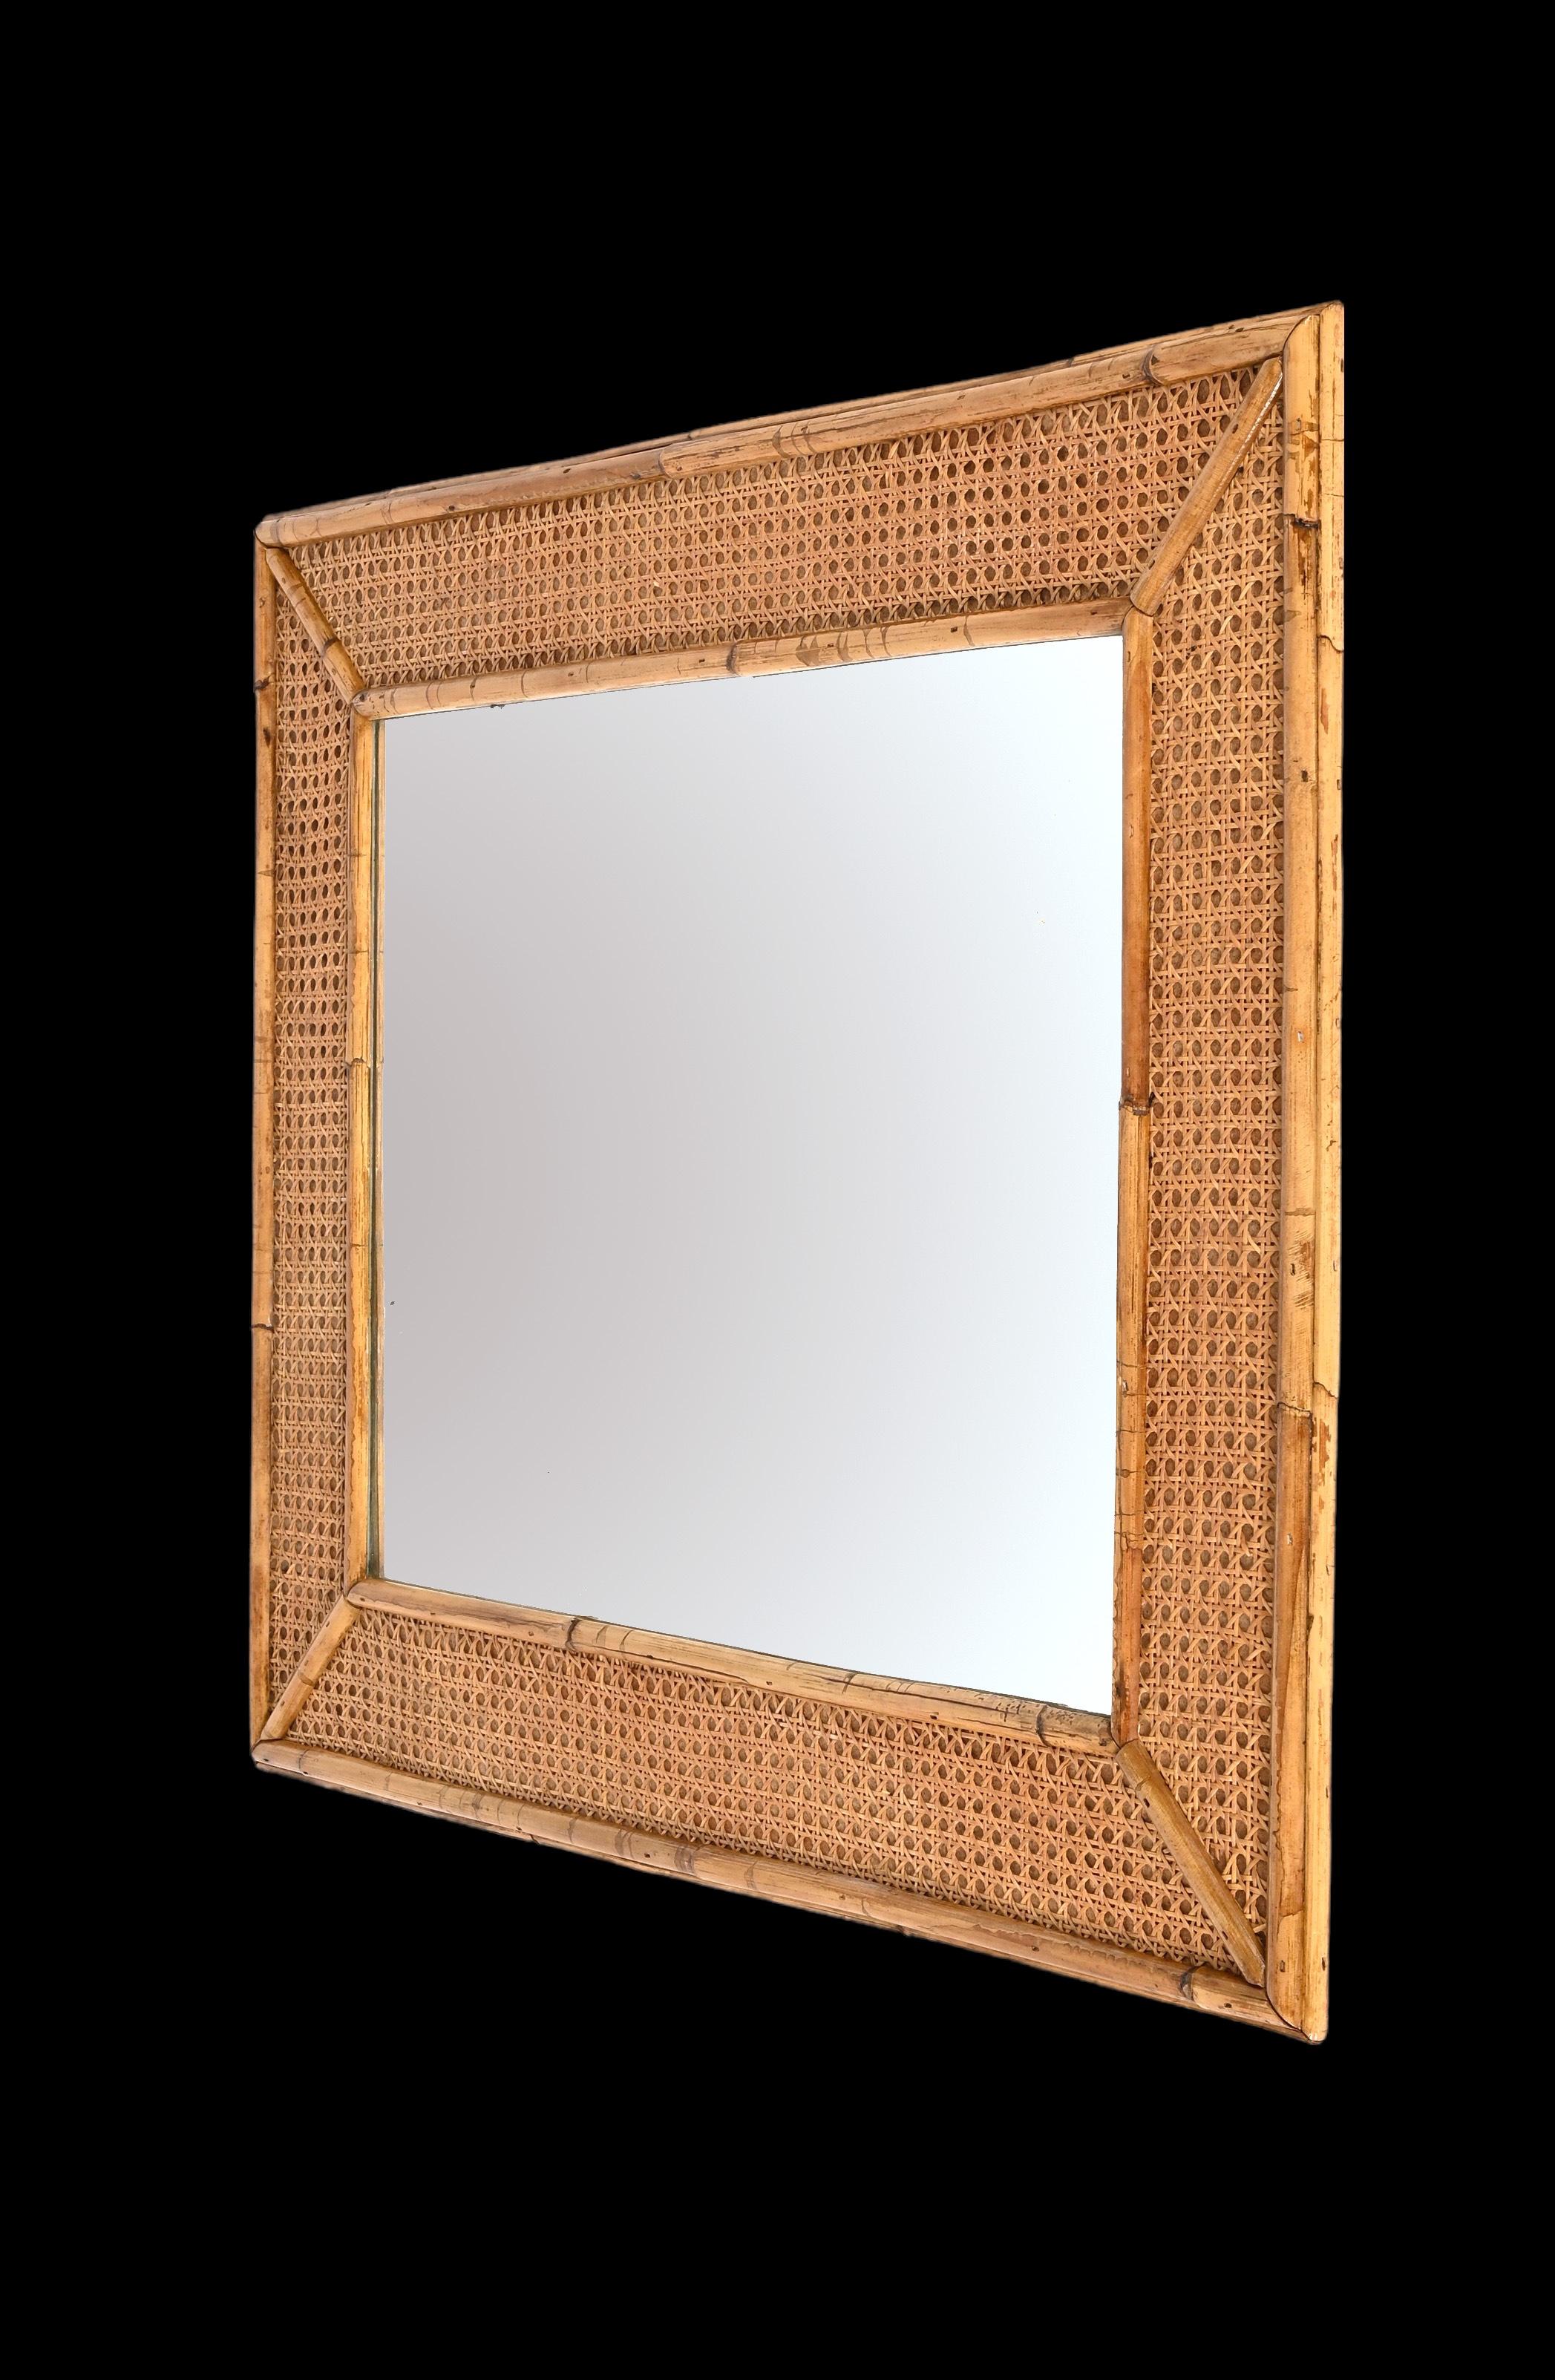 Midcentury Rectangular Italian Mirror with Bamboo and Vienna Straw Frame, 1970s For Sale 6